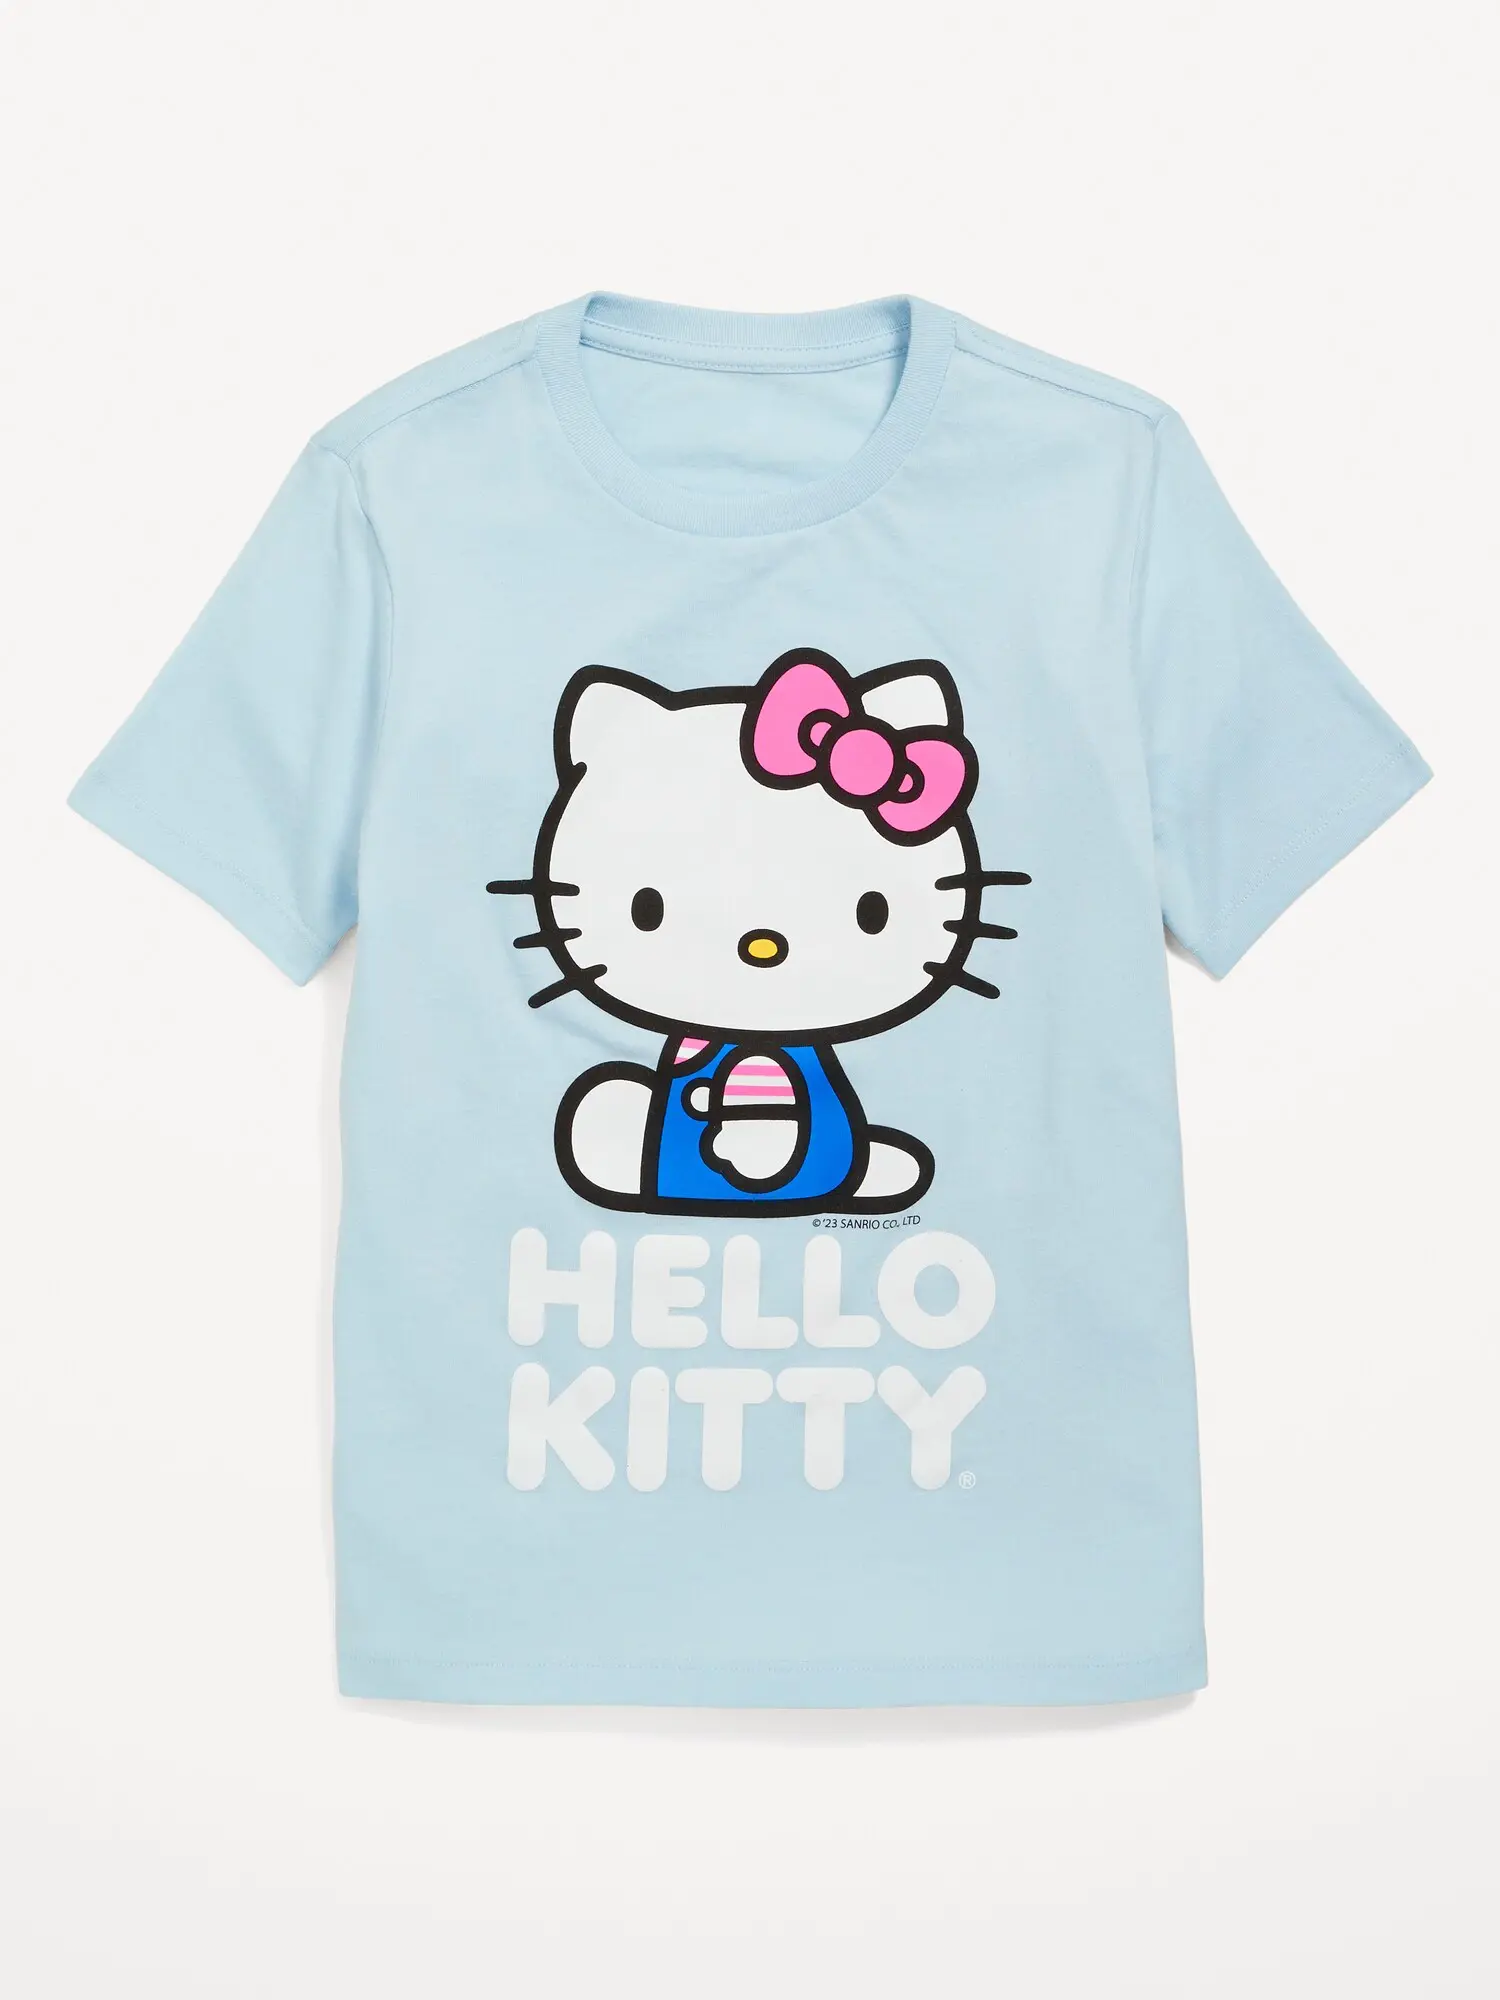 Old Navy Hello Kitty® Gender-Neutral T-Shirt for Kids blue. 1